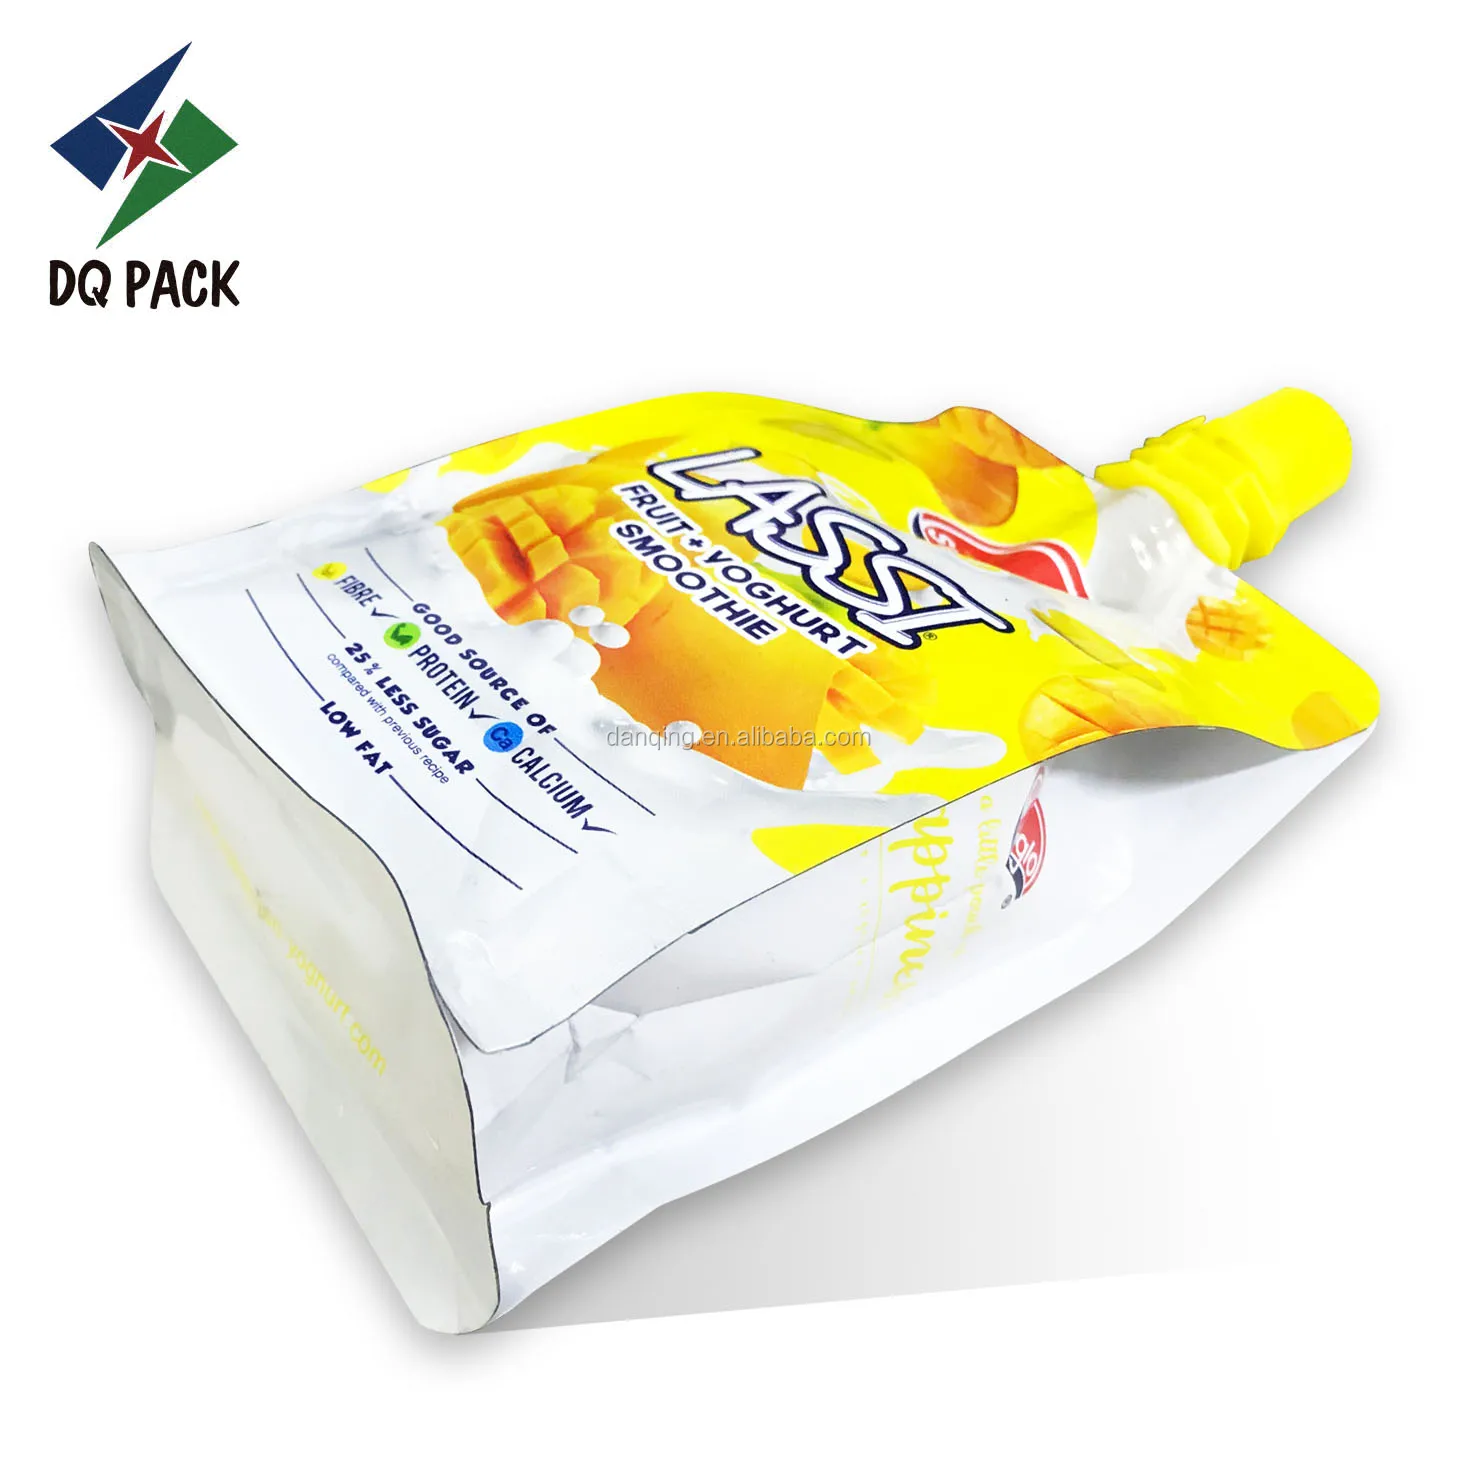 DQ PACK New Custom Design Printing Flat Bottom Juice Baby Food Spout Pouches